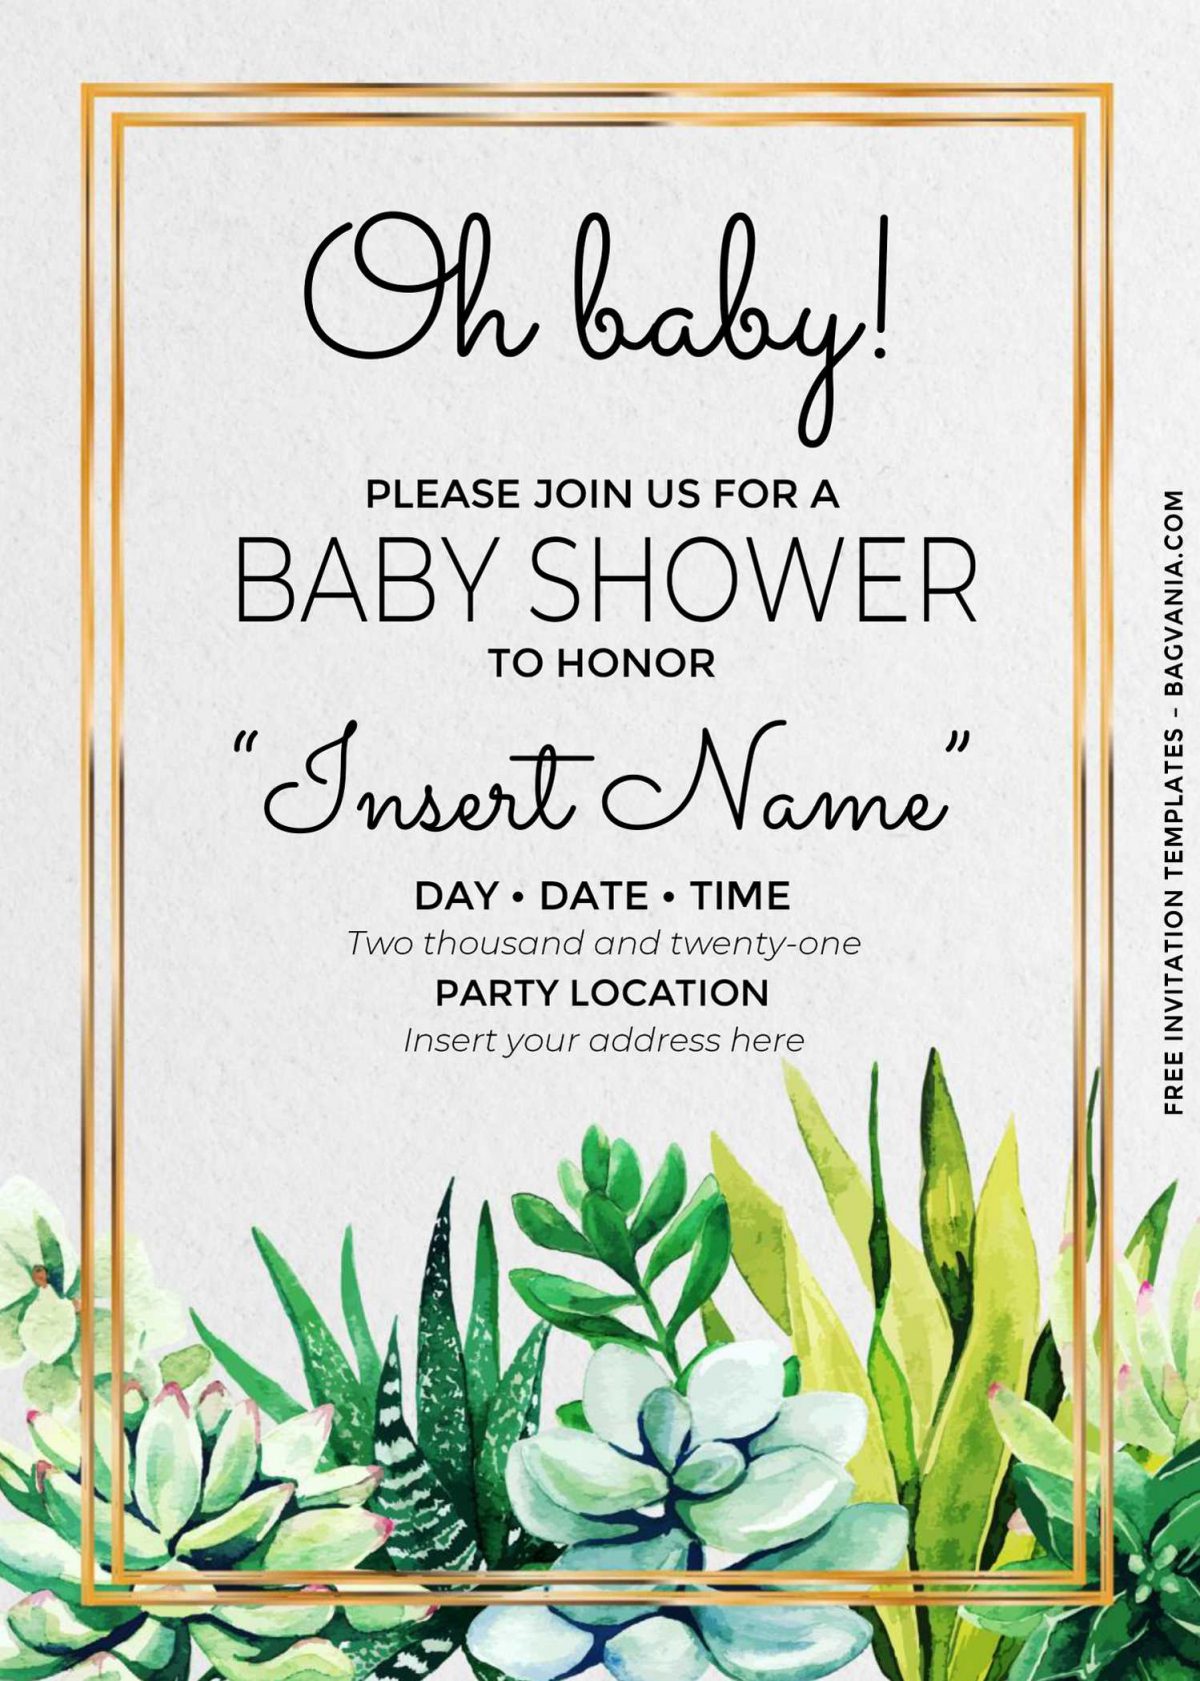 Free Oh Baby Cactus Birthday Invitation Templates For Word and has metallic gold text frame border